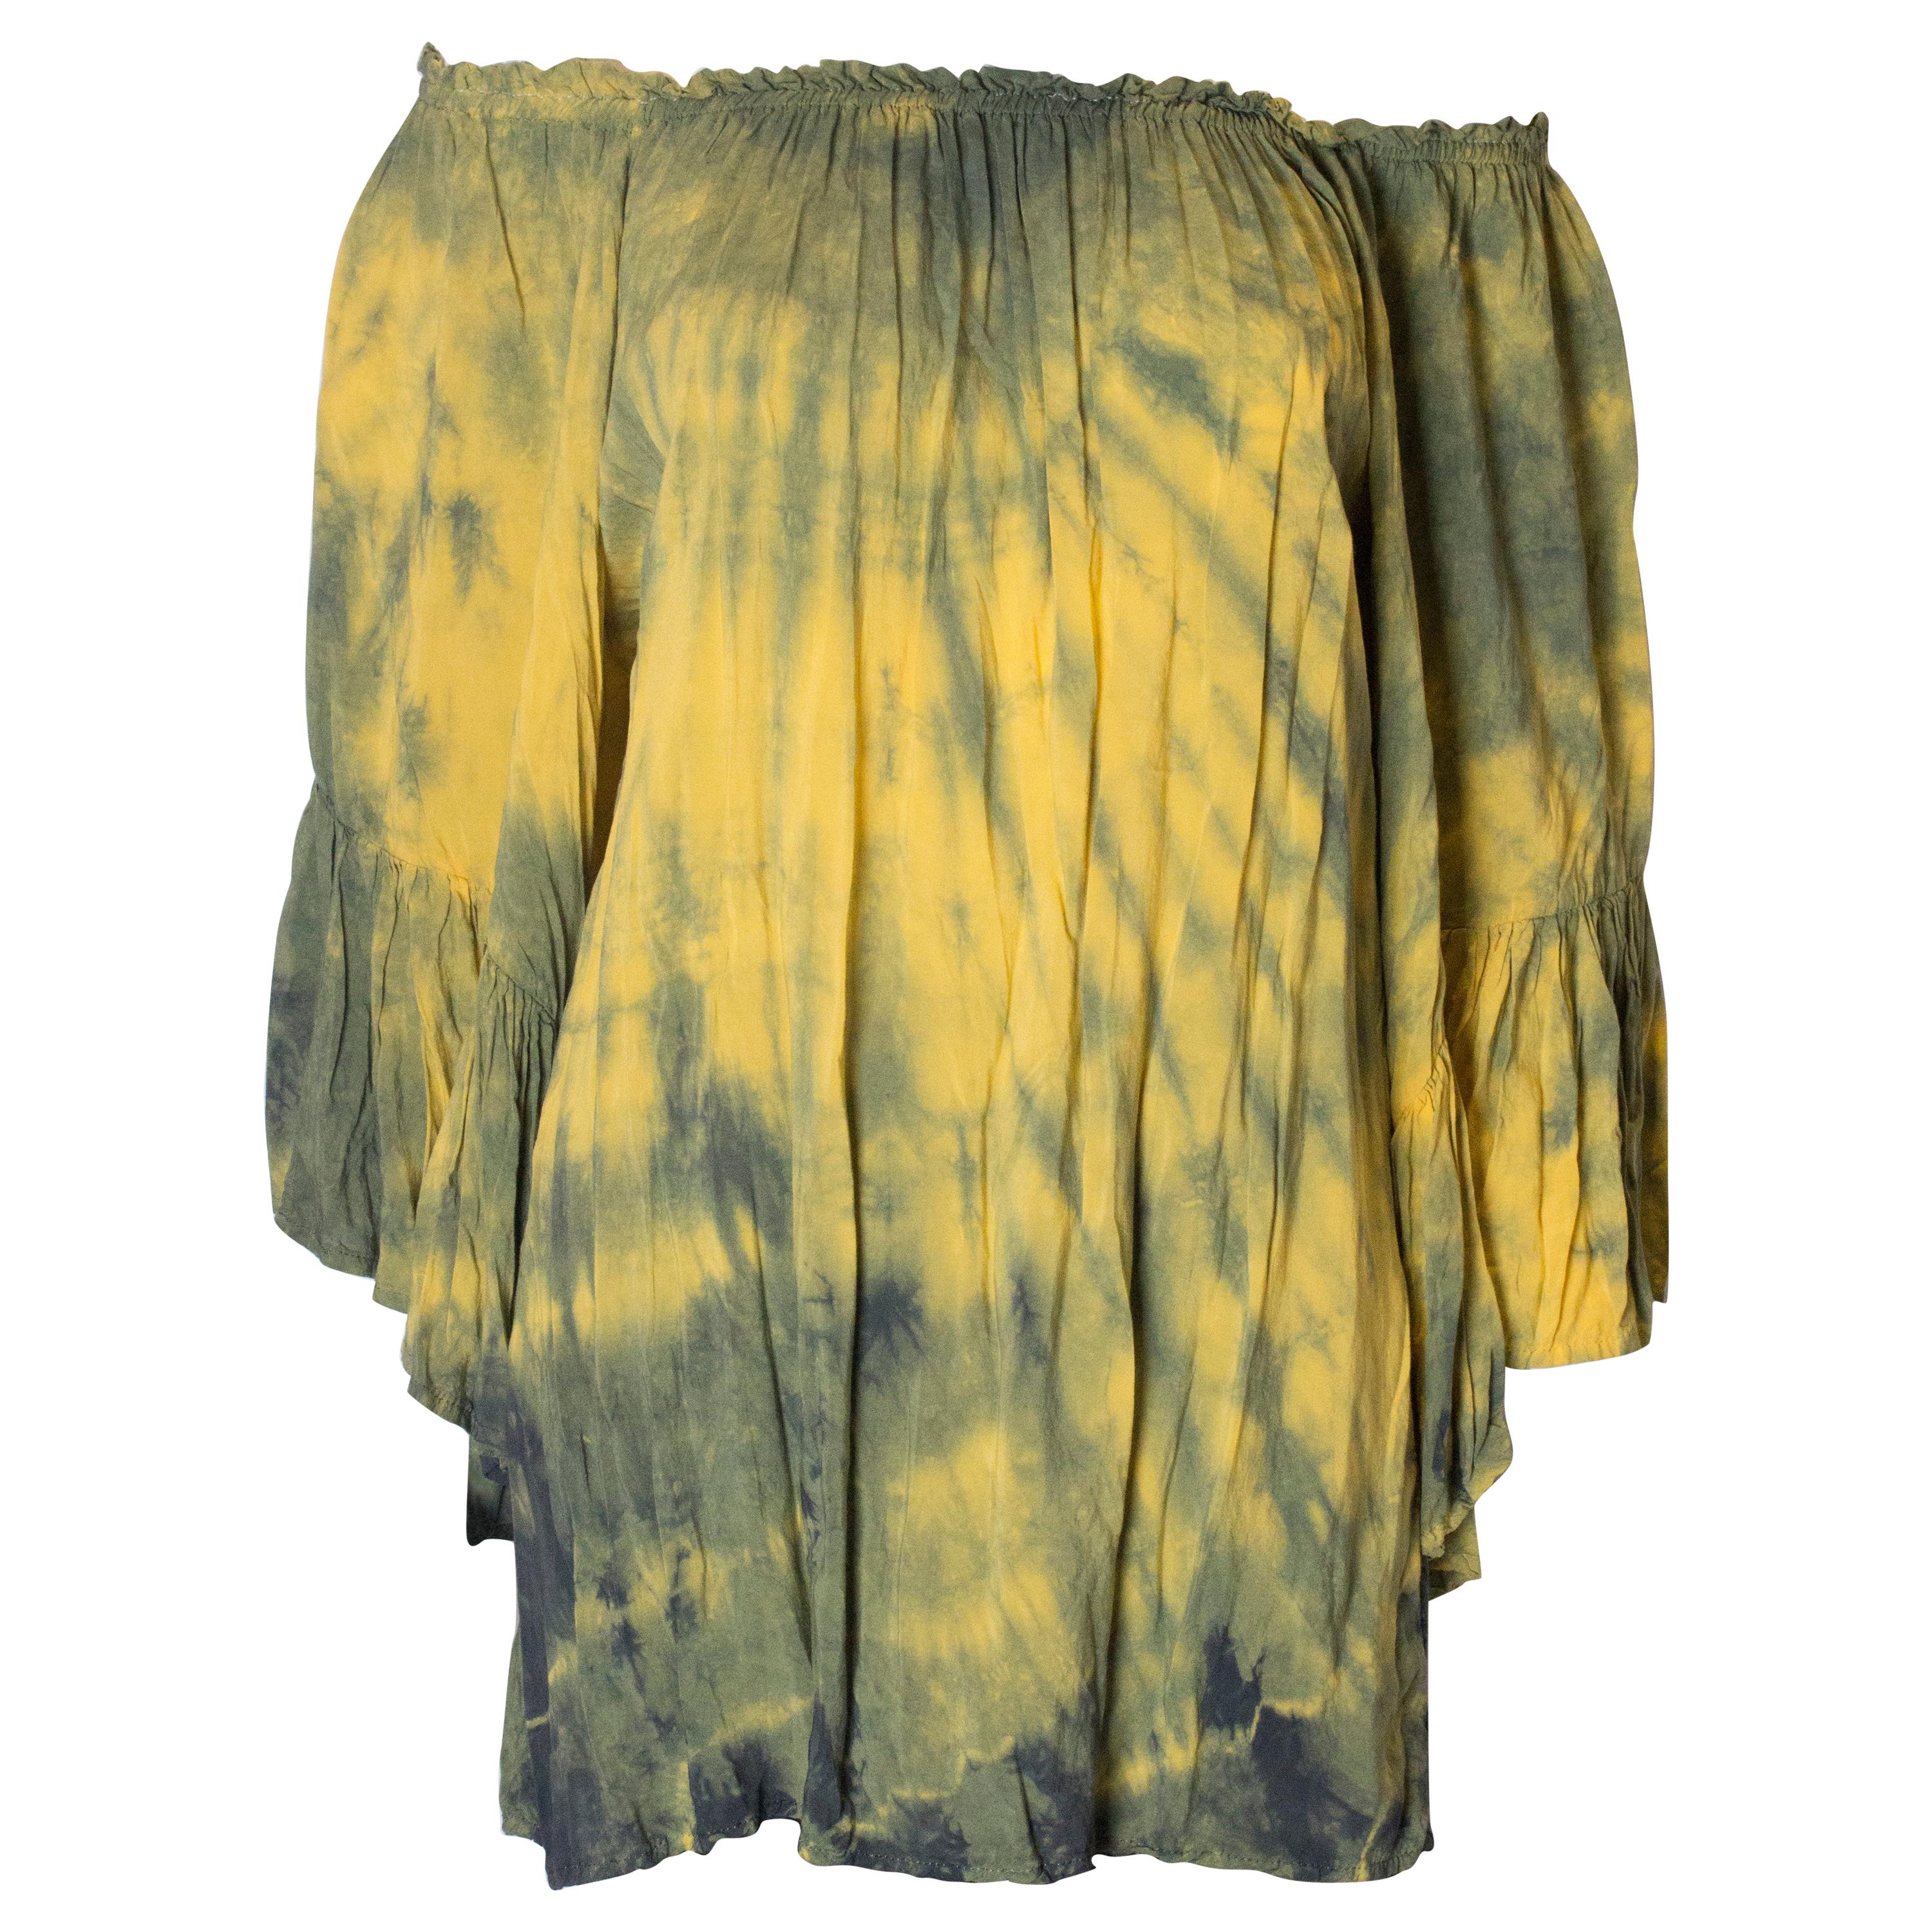 Vintage Boho Tie dye yellow and green top